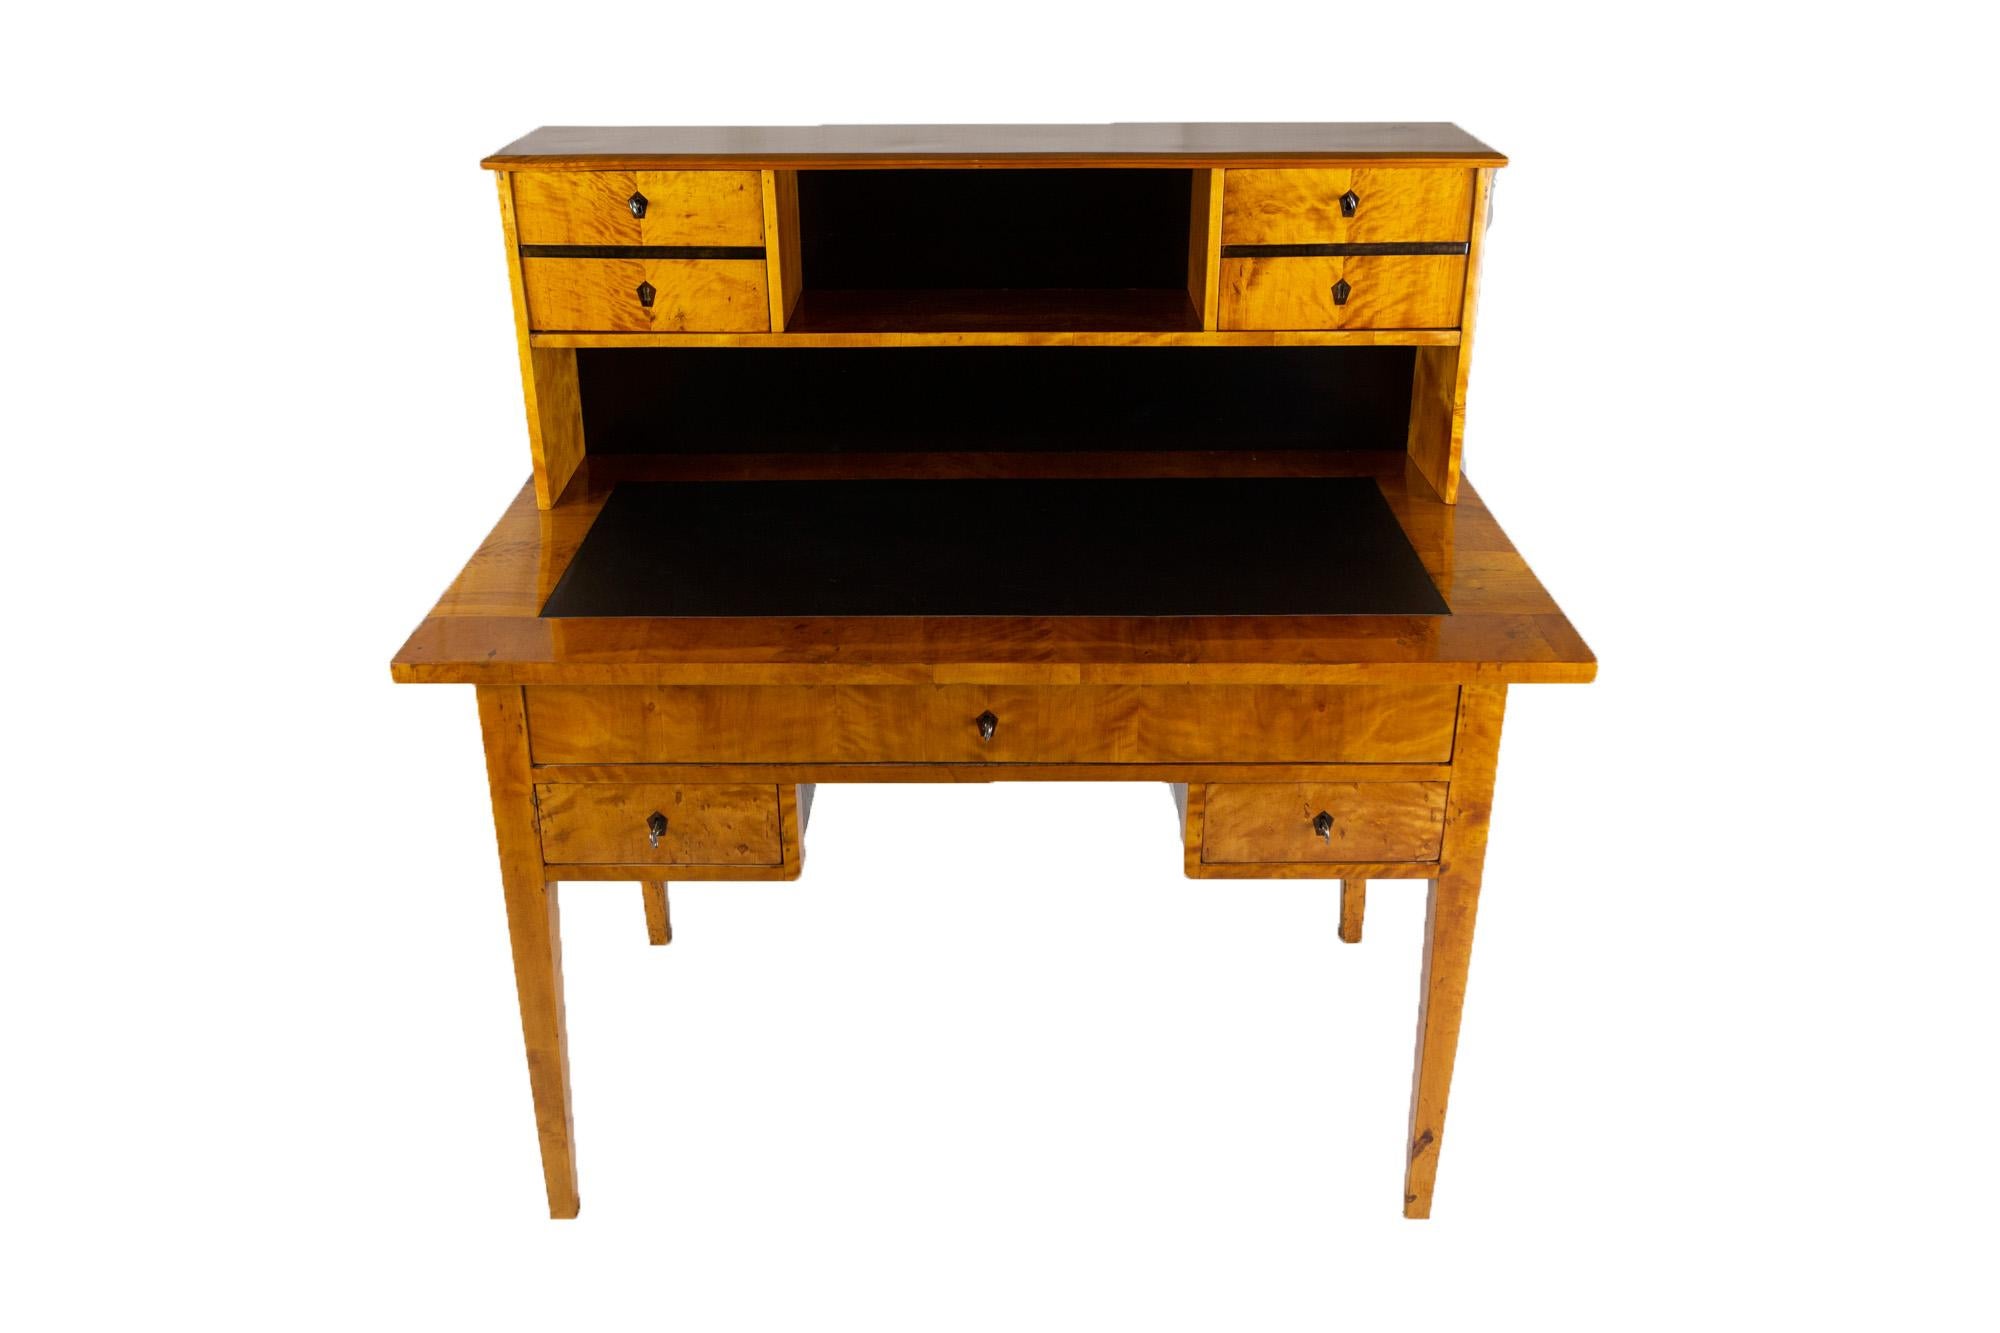 19th century Biedermeier Period writing desk in Birchwood Venner with leather inlay on the writing surface.
One middle drawer and one drawers each on the right and left side of the desk. Small attachment with two doors. 

Measures: Height 120 cm,